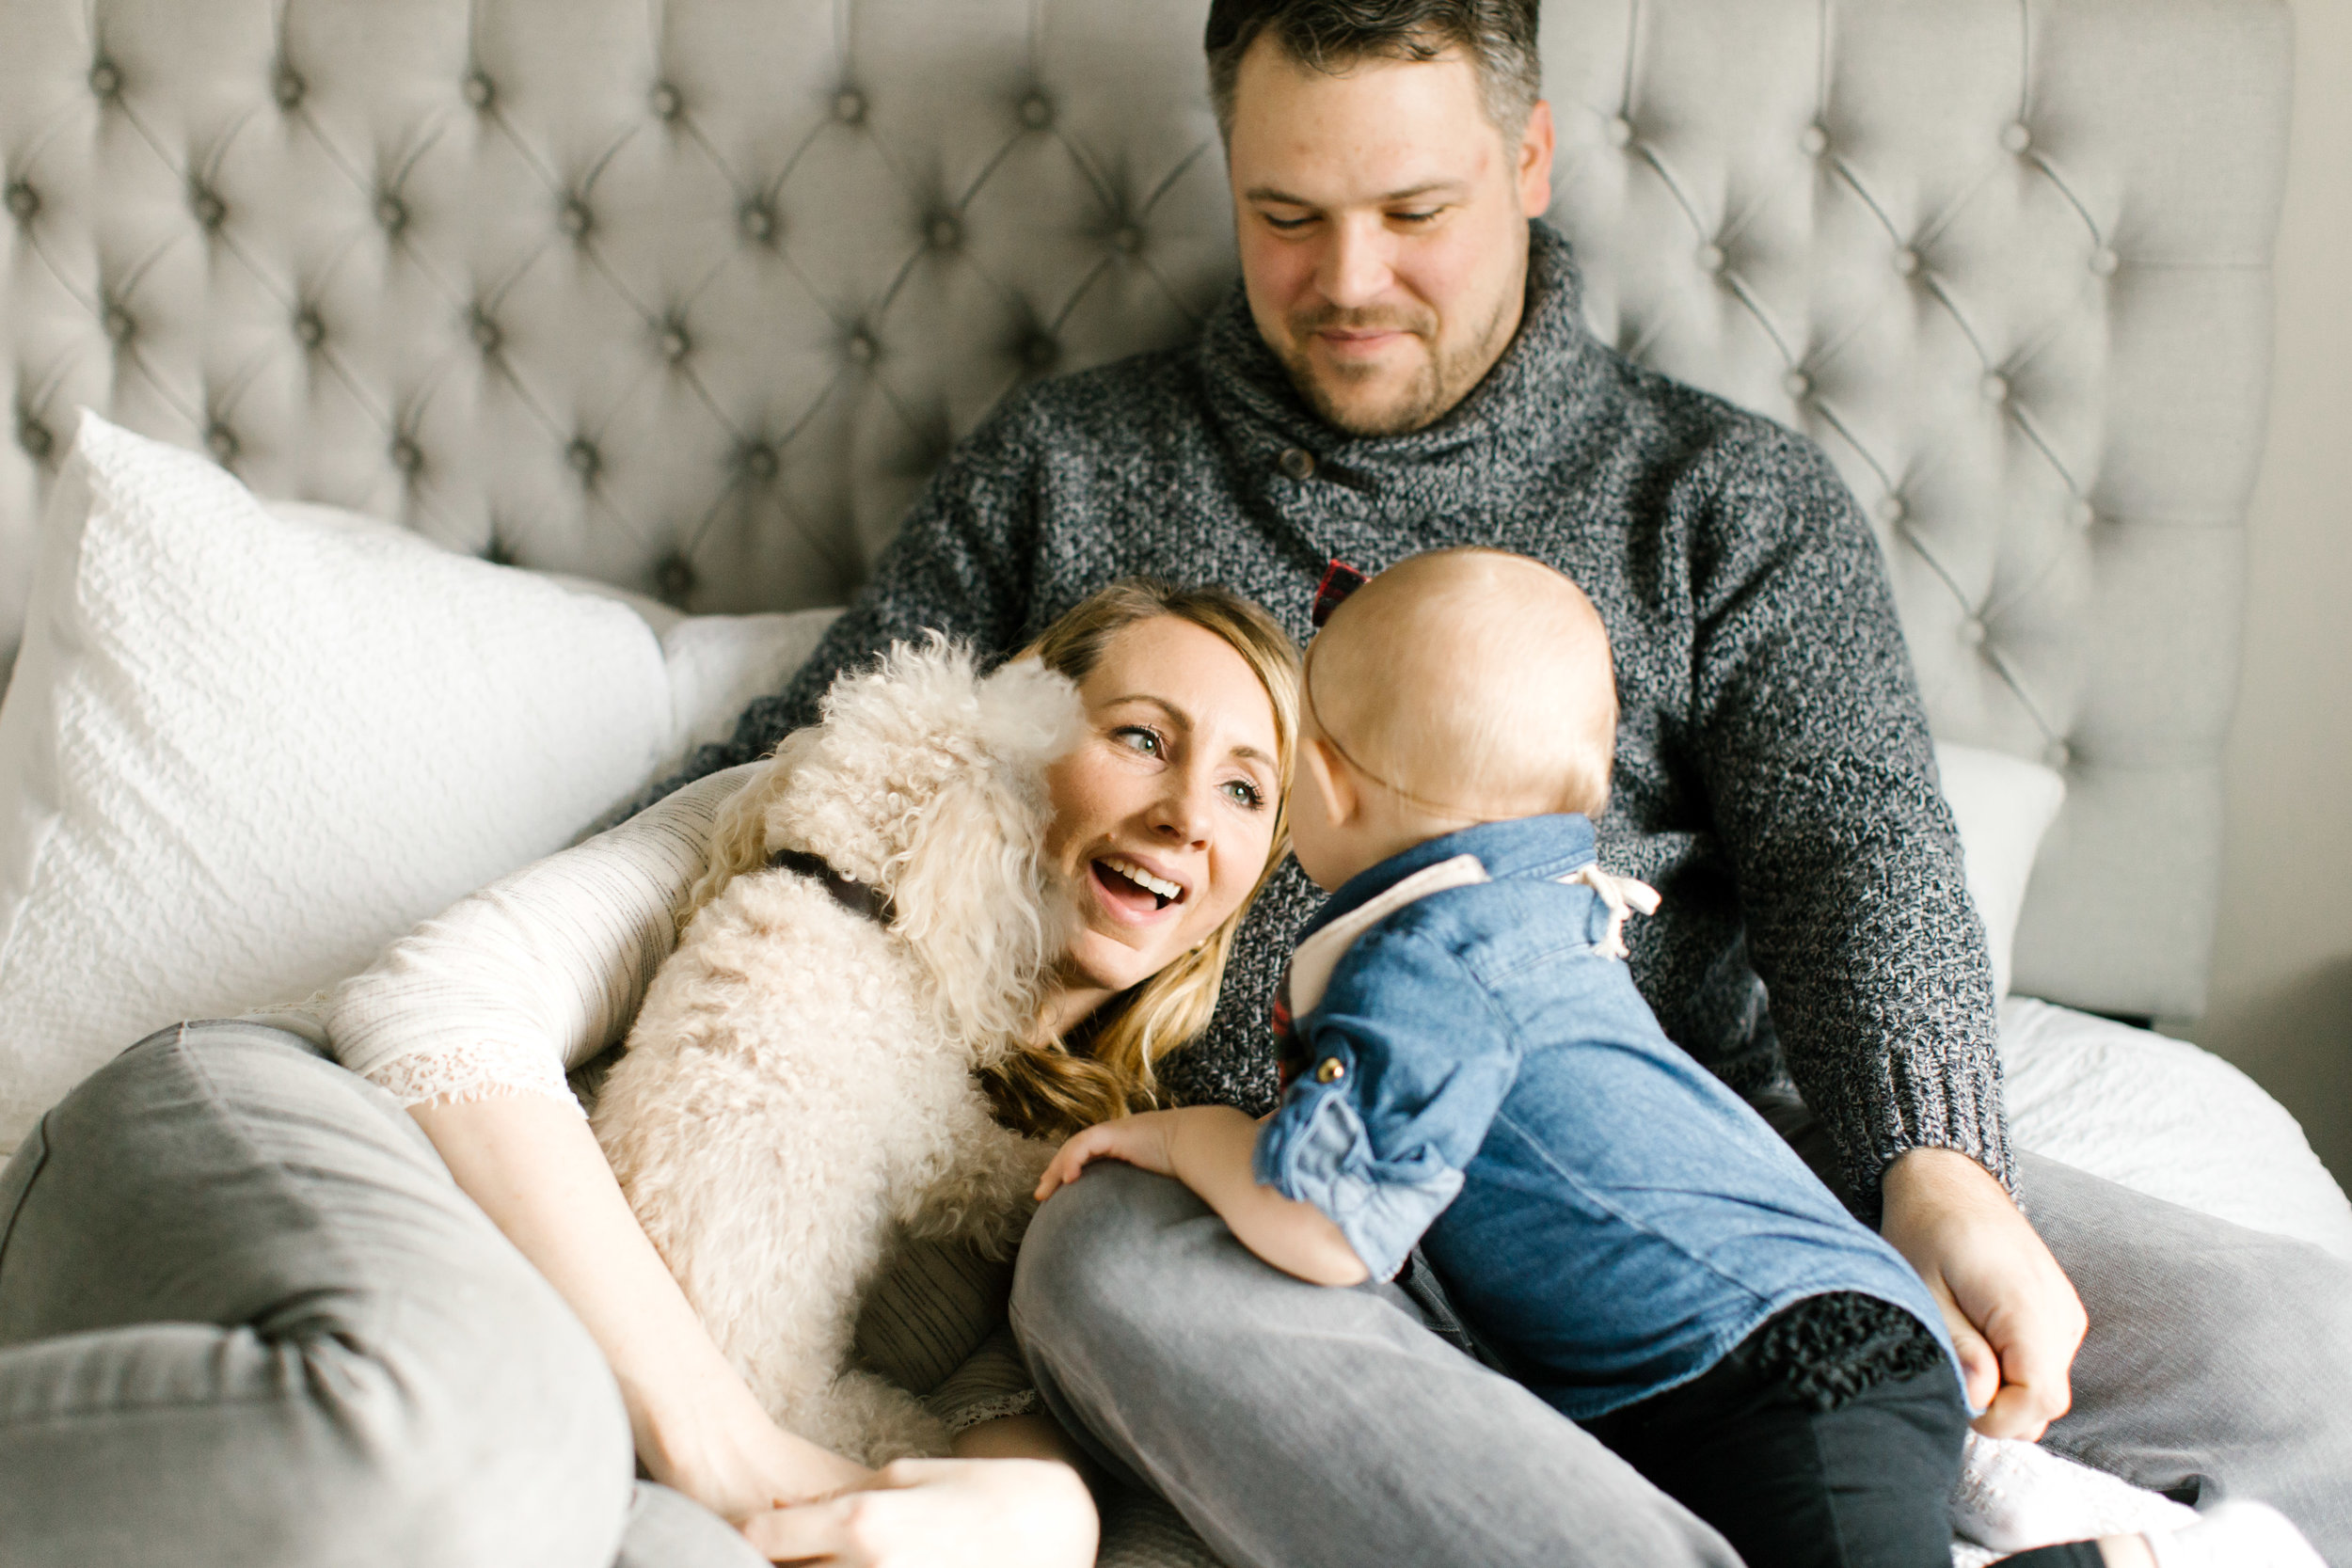 Natural light sweet family at home lifestlyle photography seattle bellevue kirkland WA Chelsea Macor Photography-4.jpg